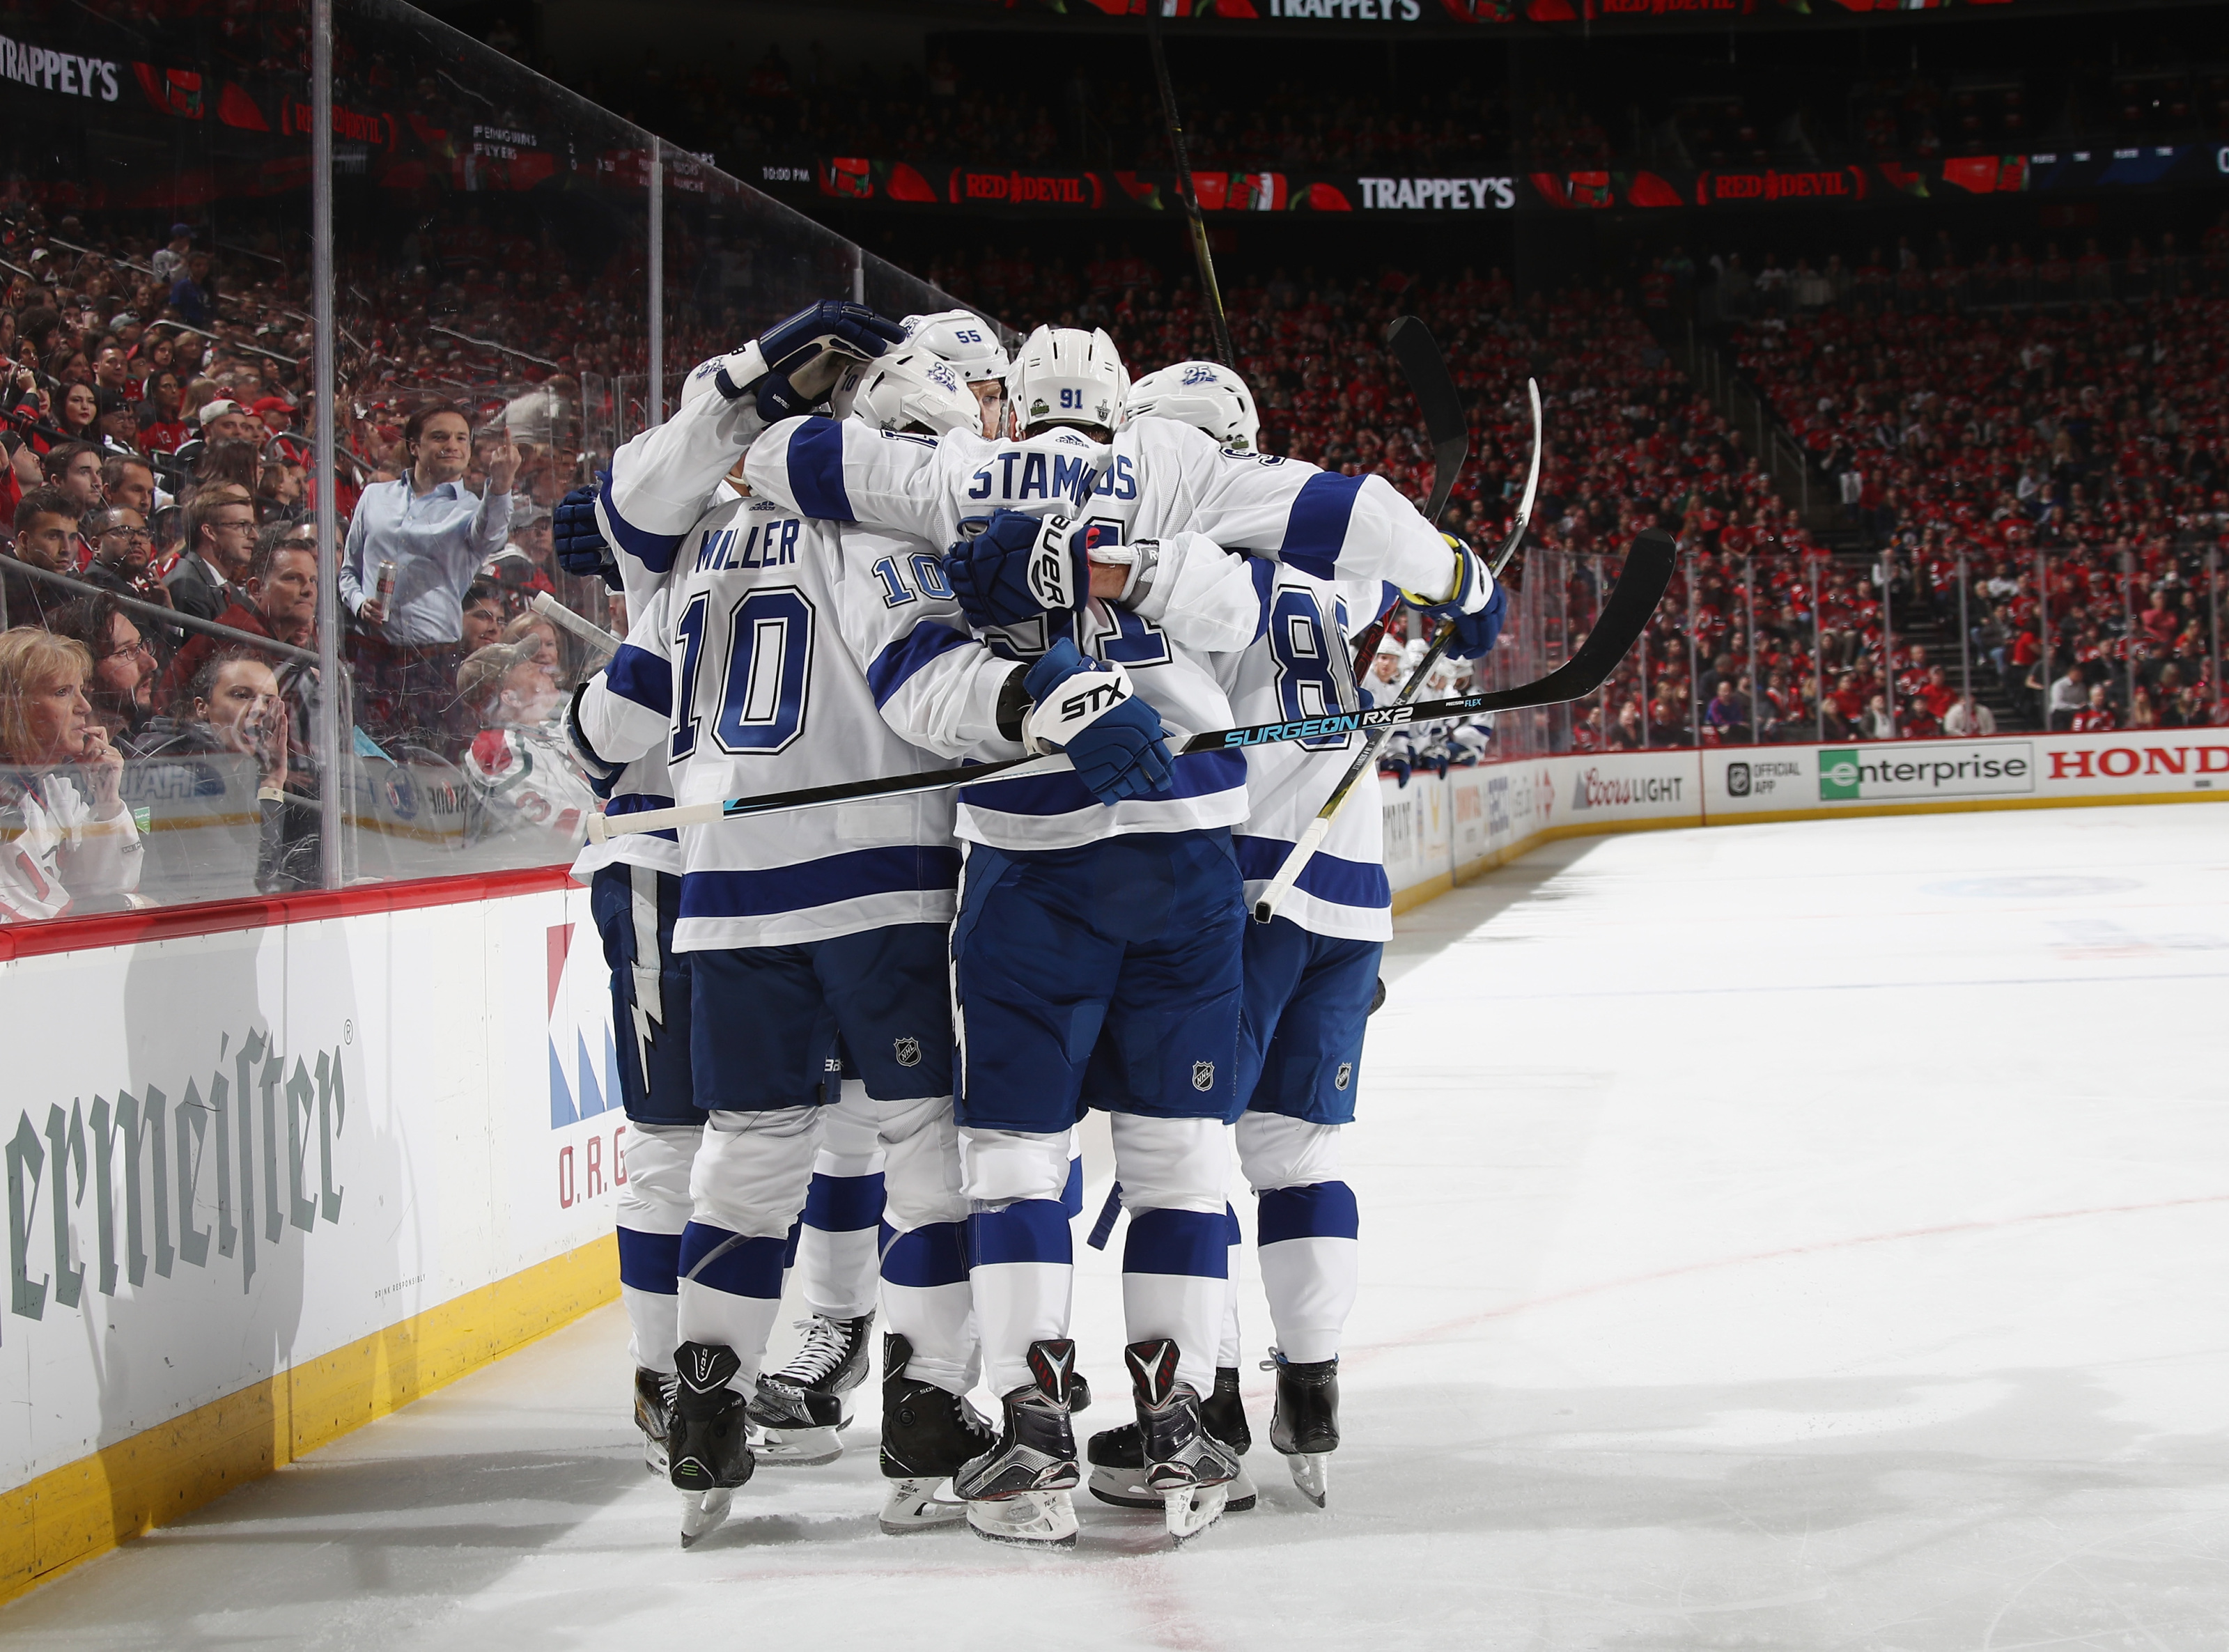 48 Hours Later, Lightning Finishes Off Devils in Suspended Game